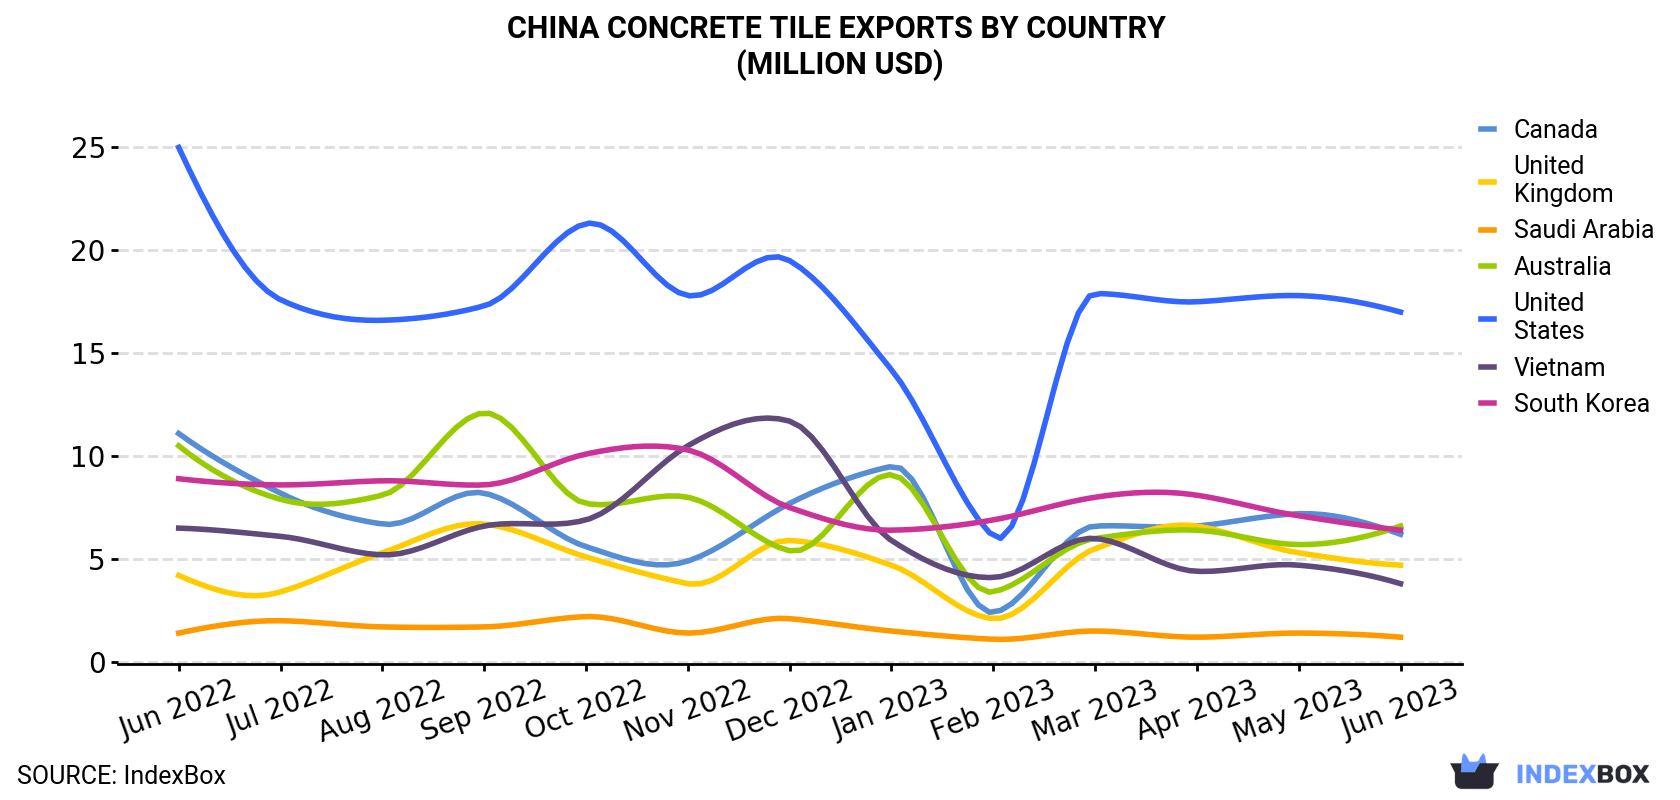 China Concrete Tile Exports By Country (Million USD)